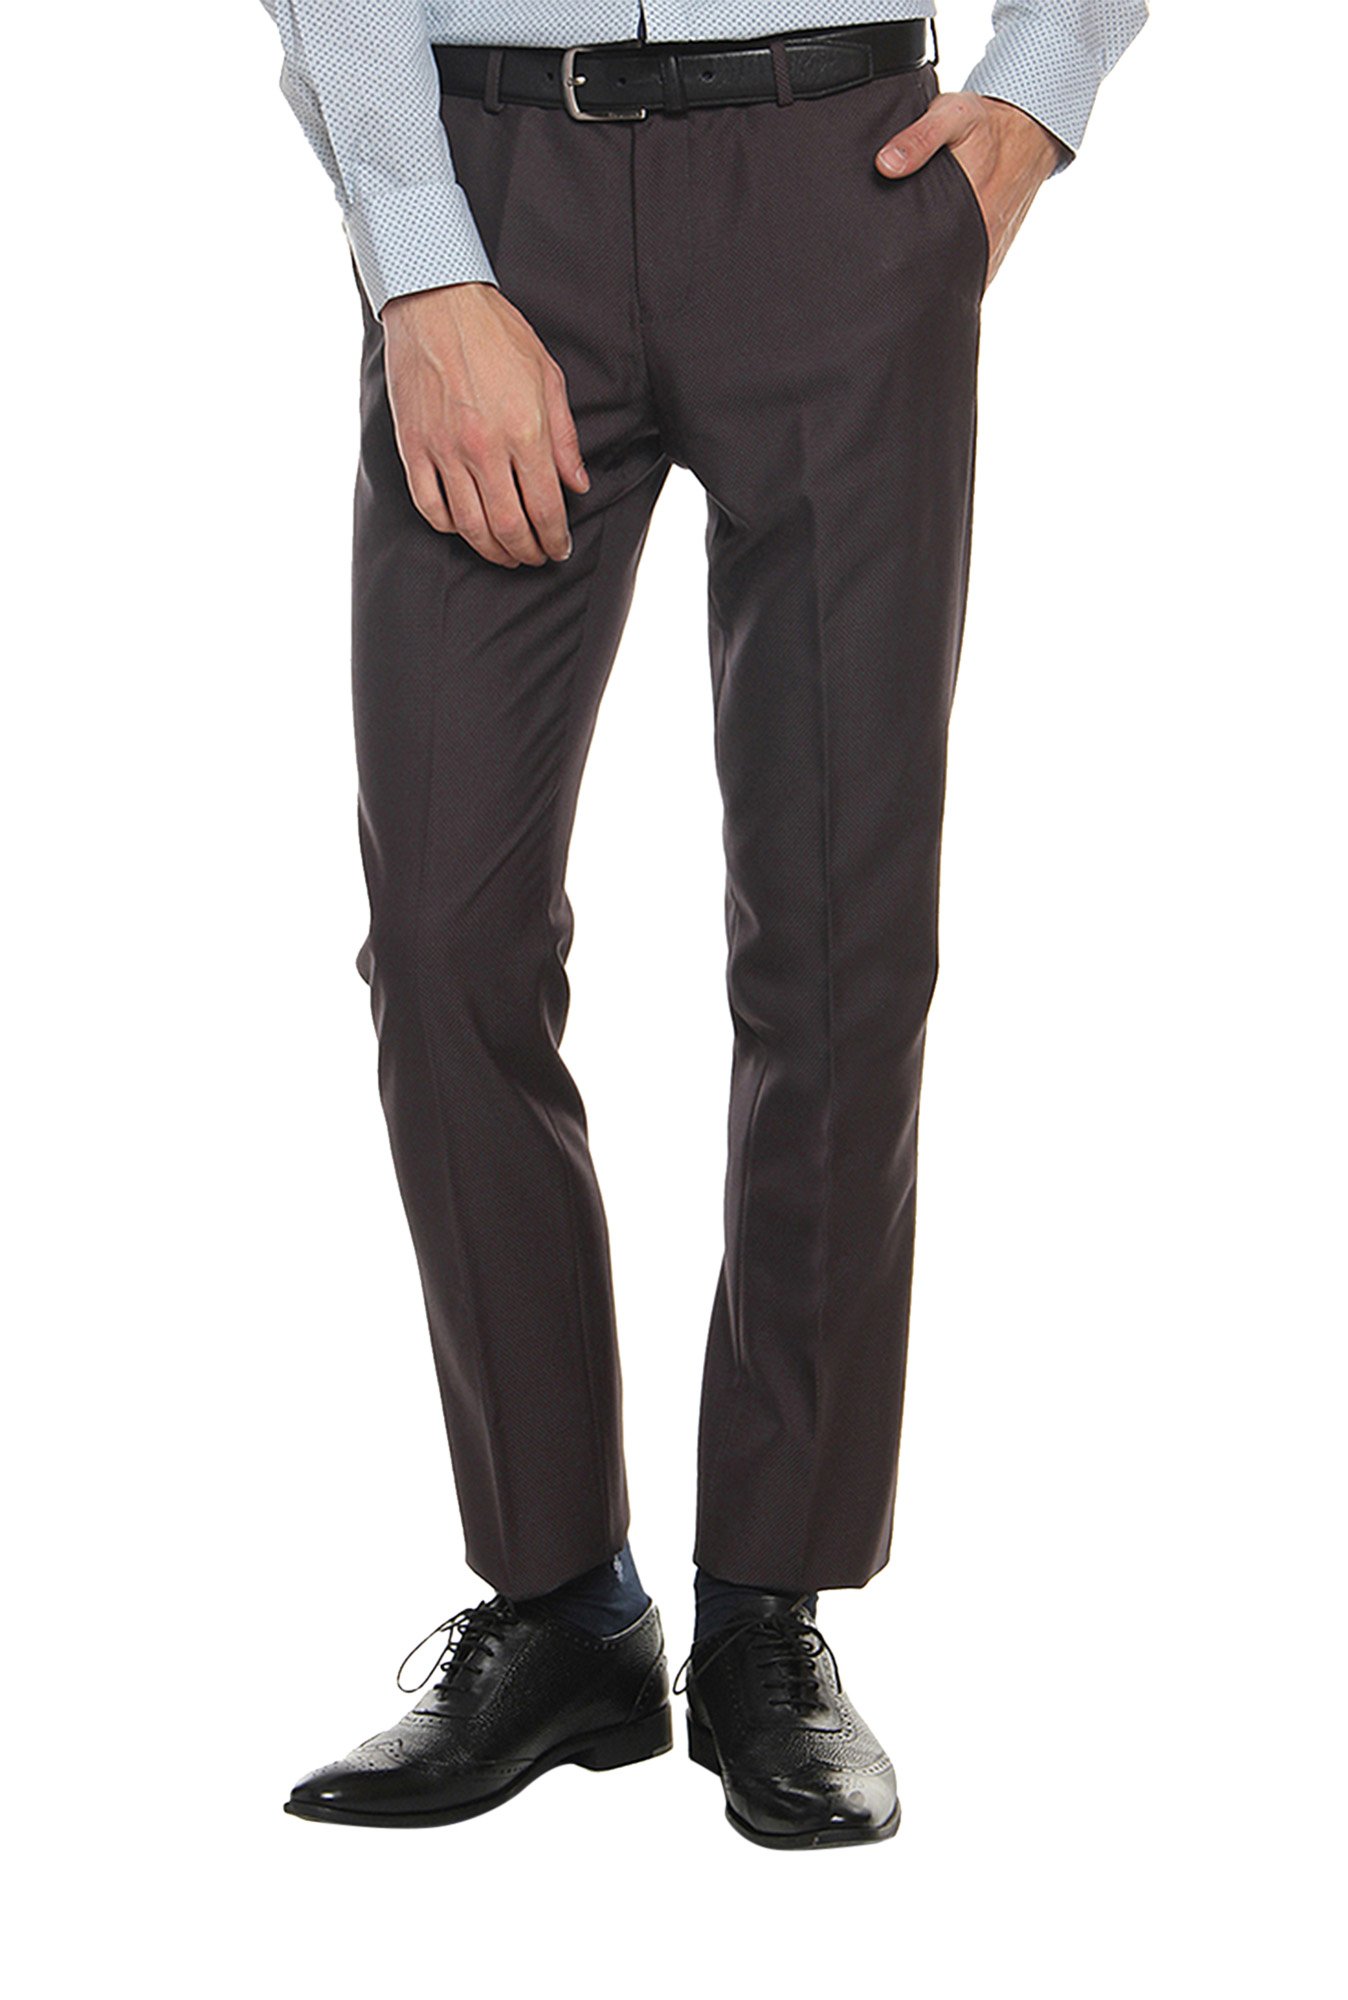 Arrow Newyork Men Flat Front Check Formal Trousers Dark Grey 30 in  Chennai at best price by Urban Touch Showroom  Justdial